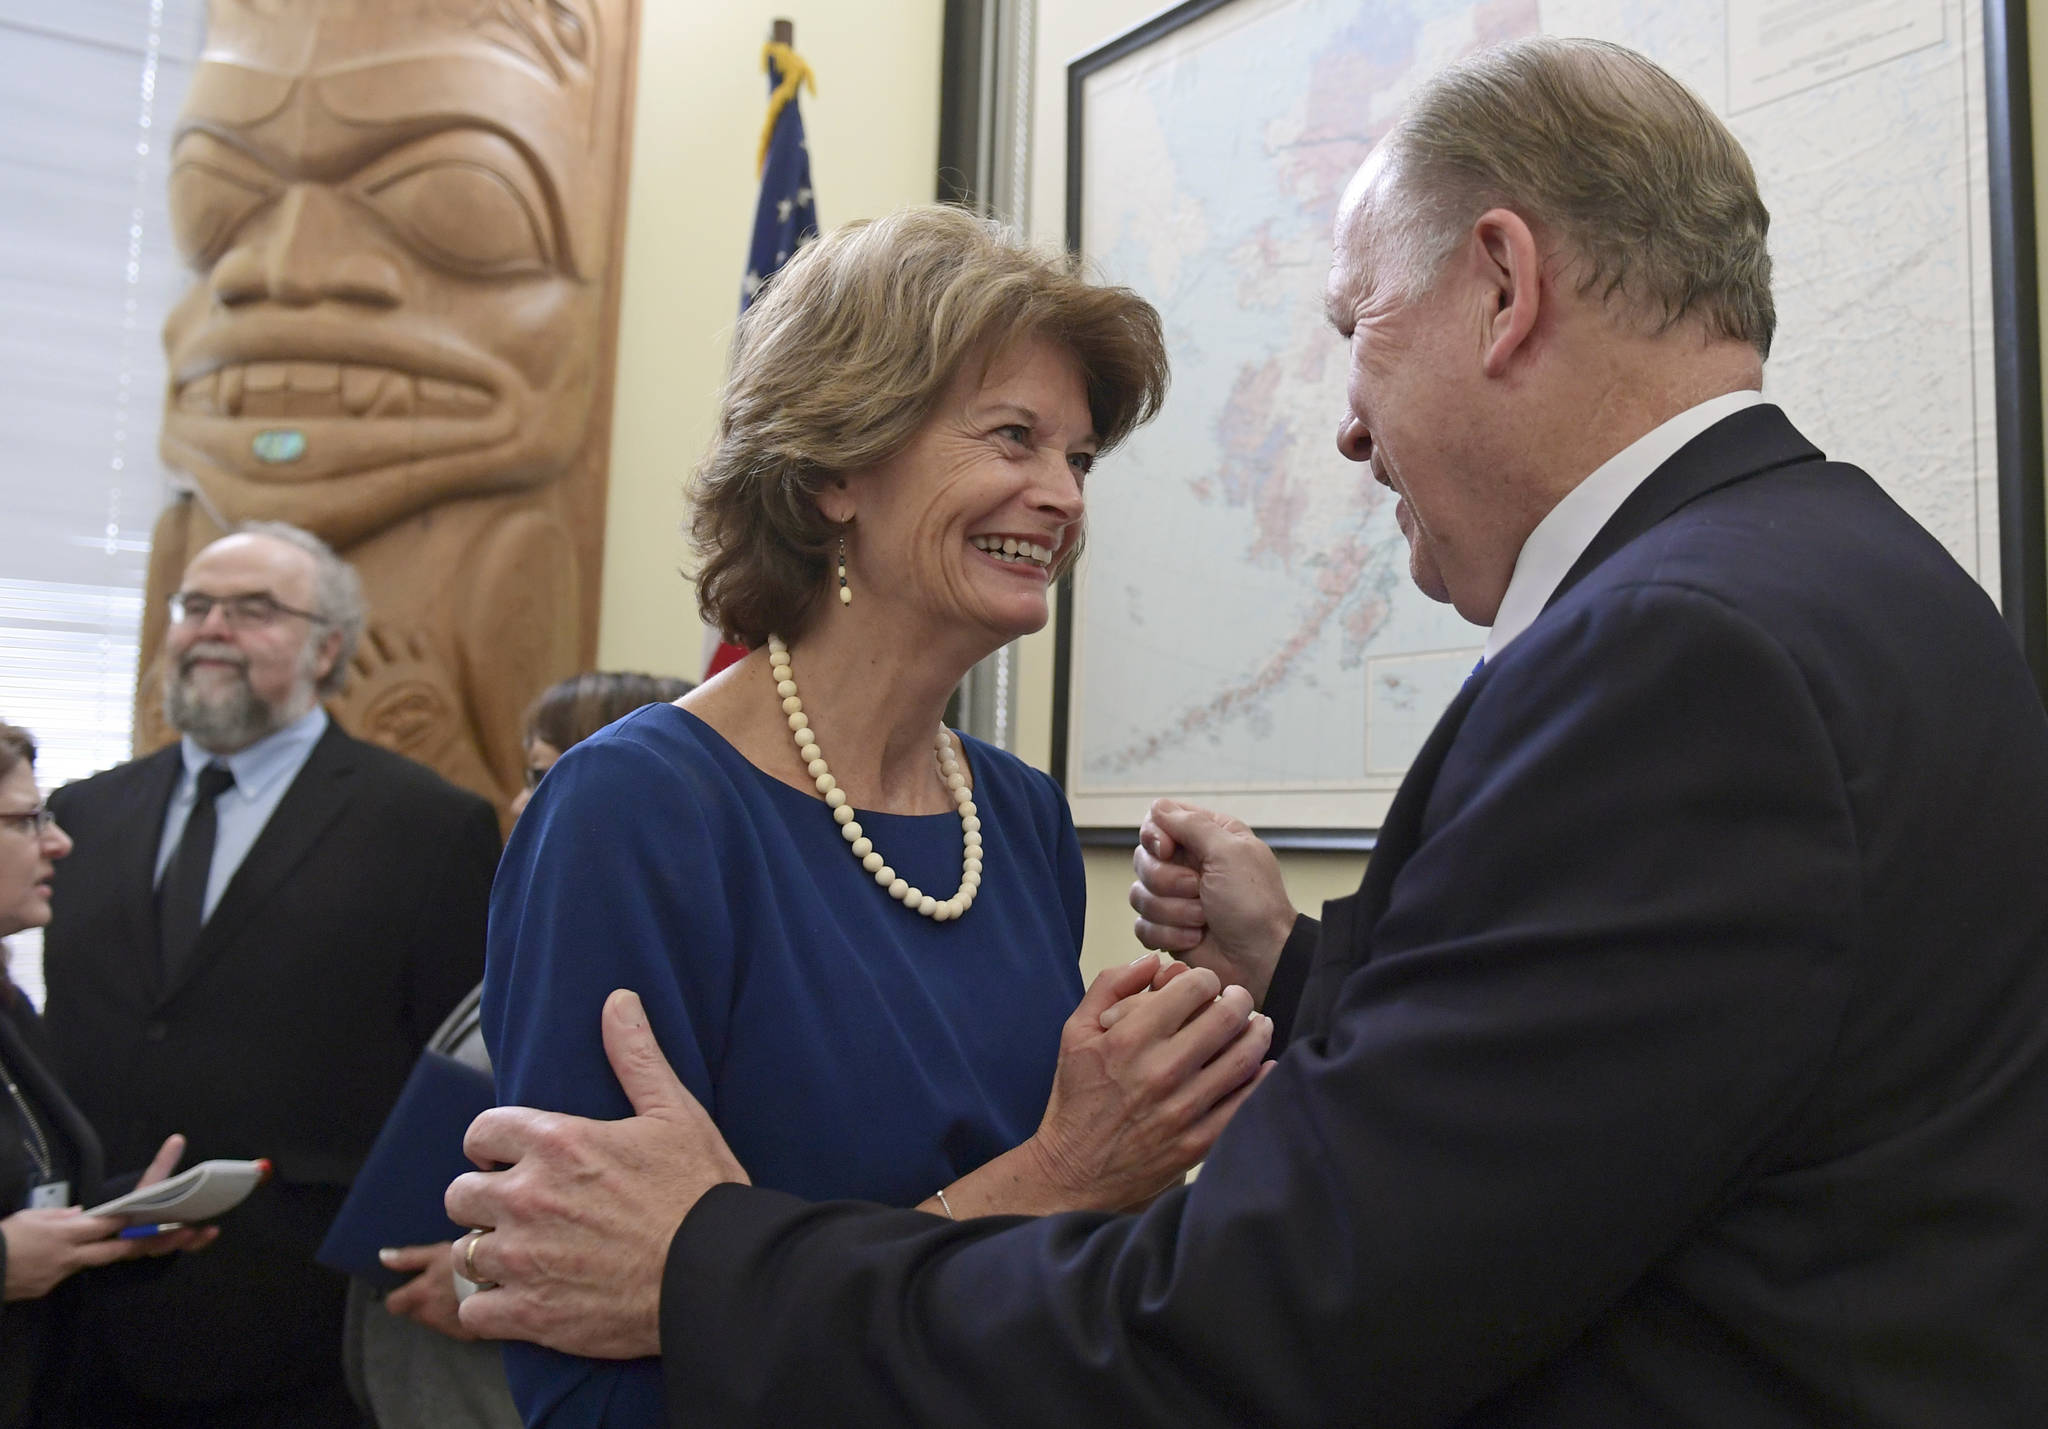 Sen. Lisa Murkowski, R-Alaska, center, talks with Alaska Gov. Bill Walker, right, following an event in her office on Capitol Hill in Washington, Monday, Jan. 22, 2018. Murkowski was joined by other Alaskan officials regarding the Interior Department’s decision to the construction of a road through a national wildlife refuge in Alaska.The road would connect the communities of King Cove and Cold Bay, which has an all-weather airport needed for emergency medical flights. (AP Photo/Susan Walsh)